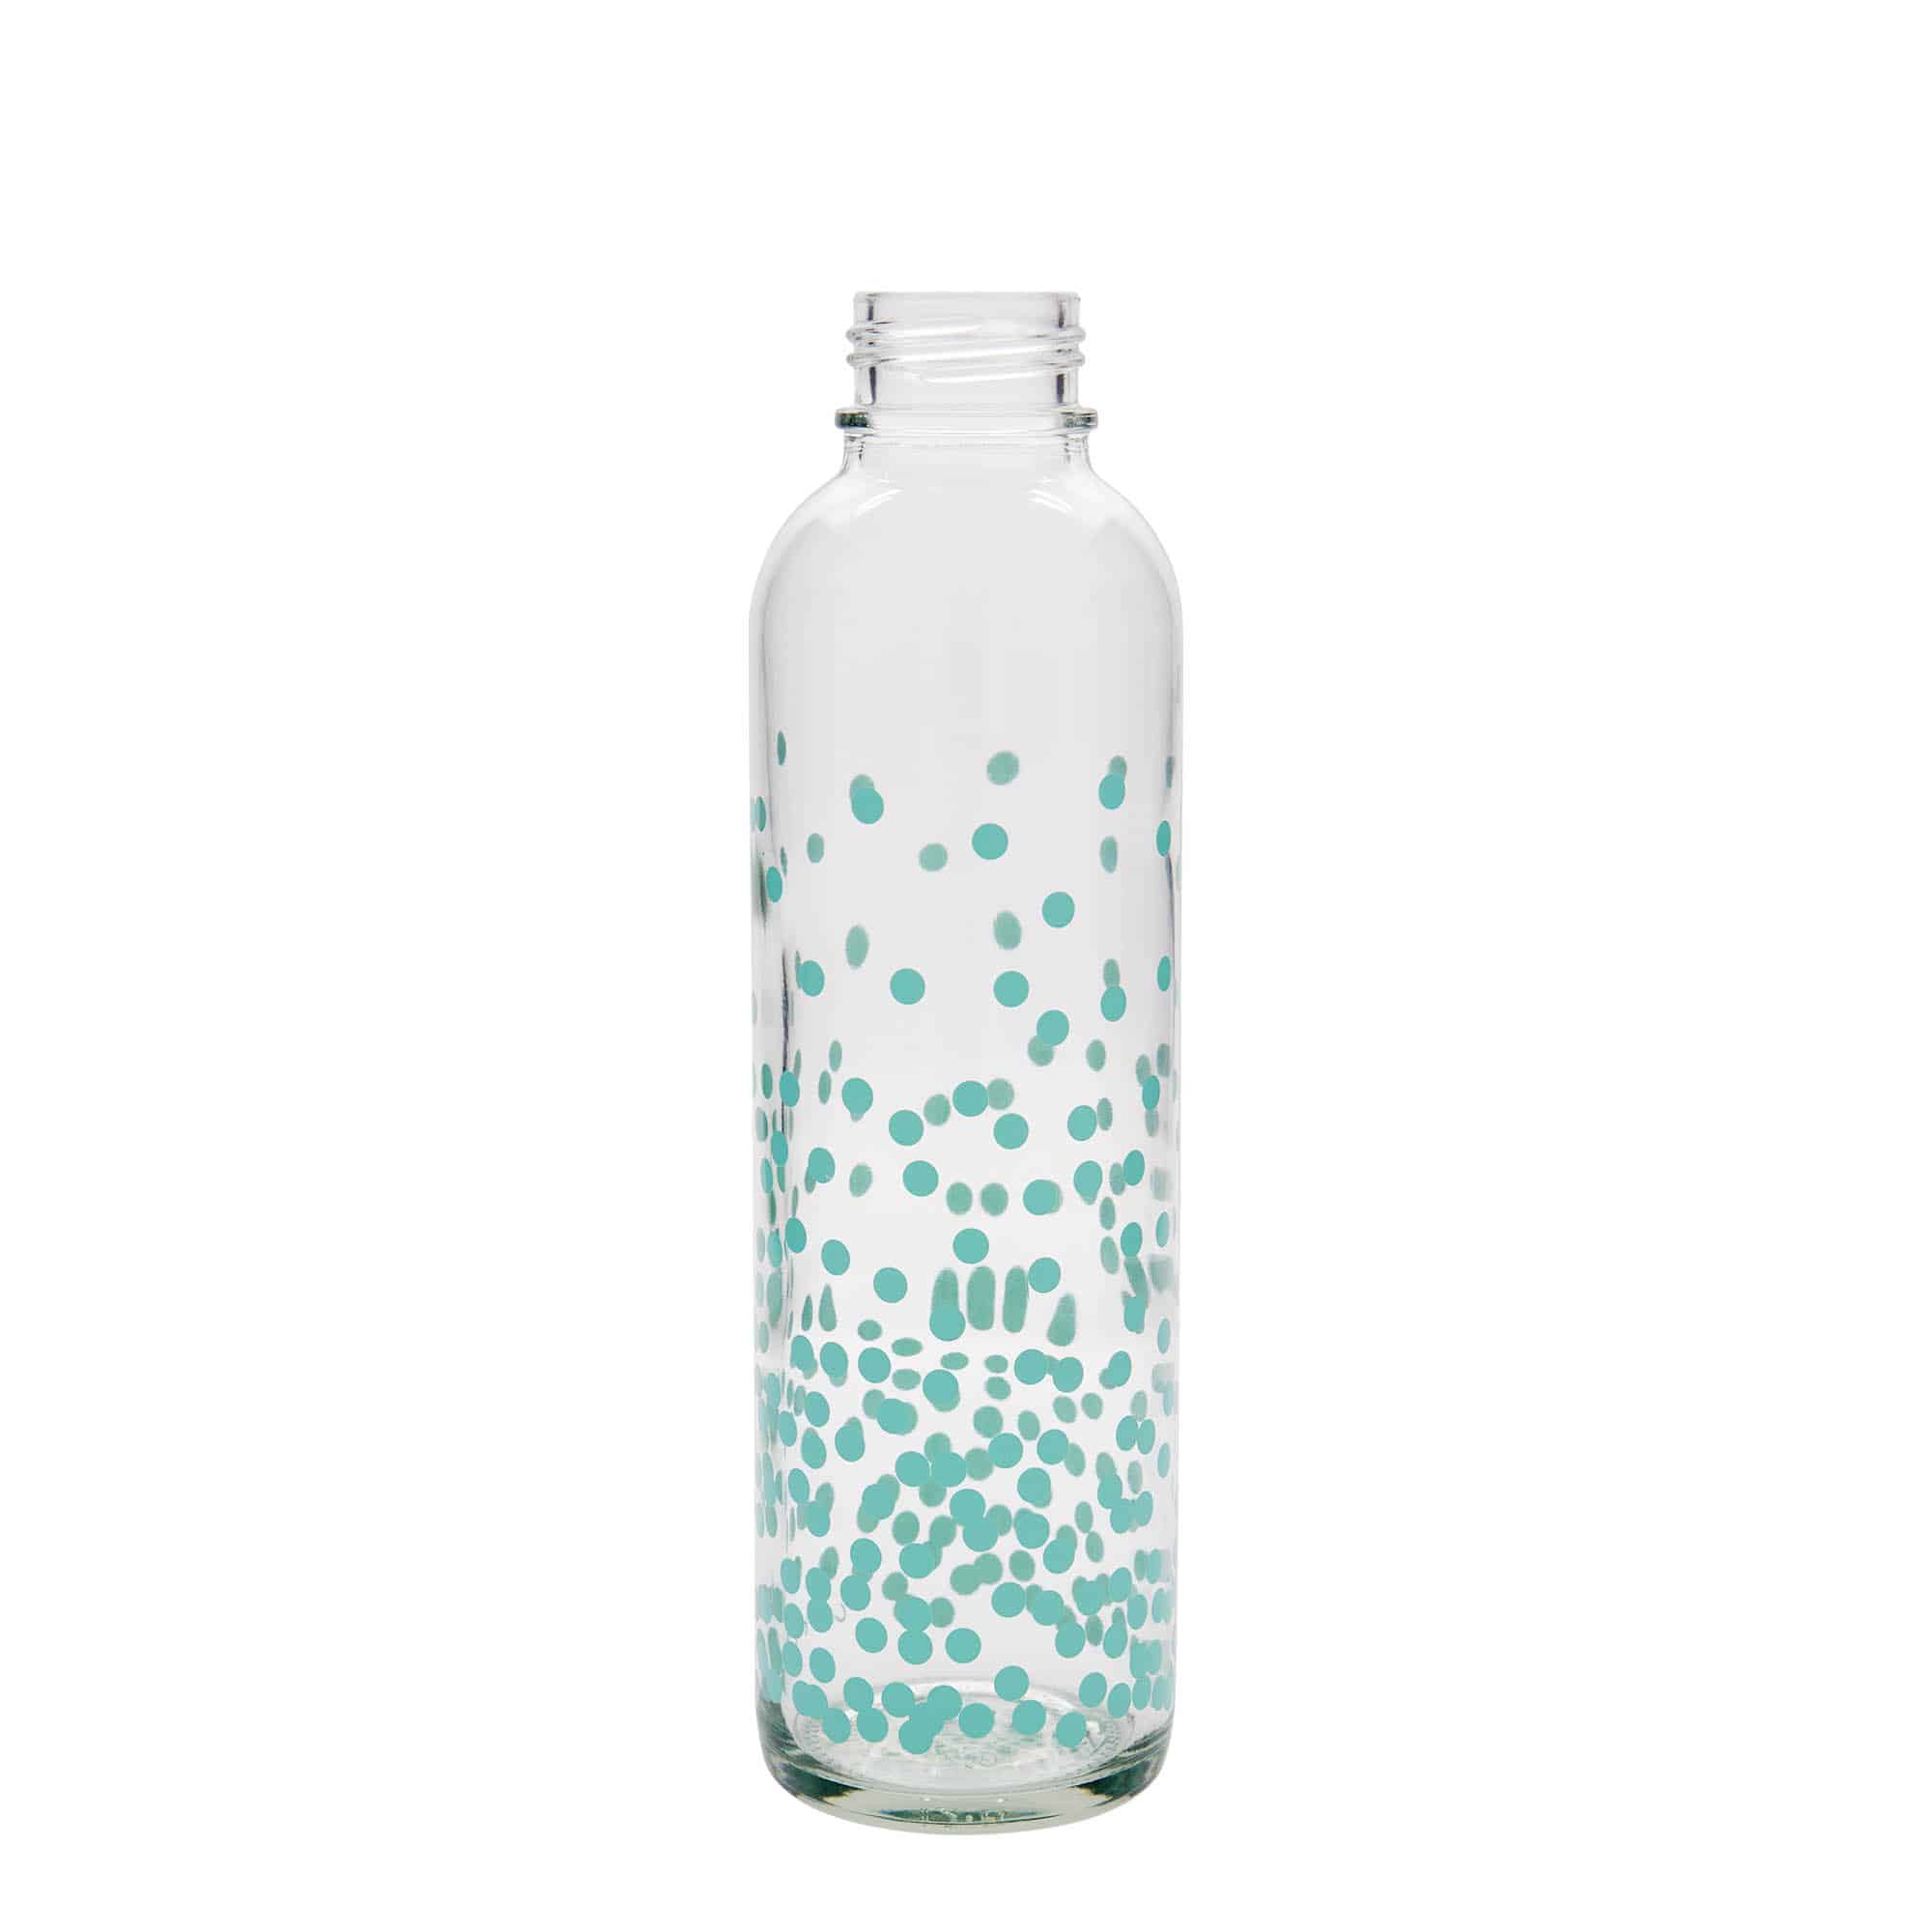 700 ml water bottle ‘CARRY Bottle’, print: Pure Happiness, closure: screw cap